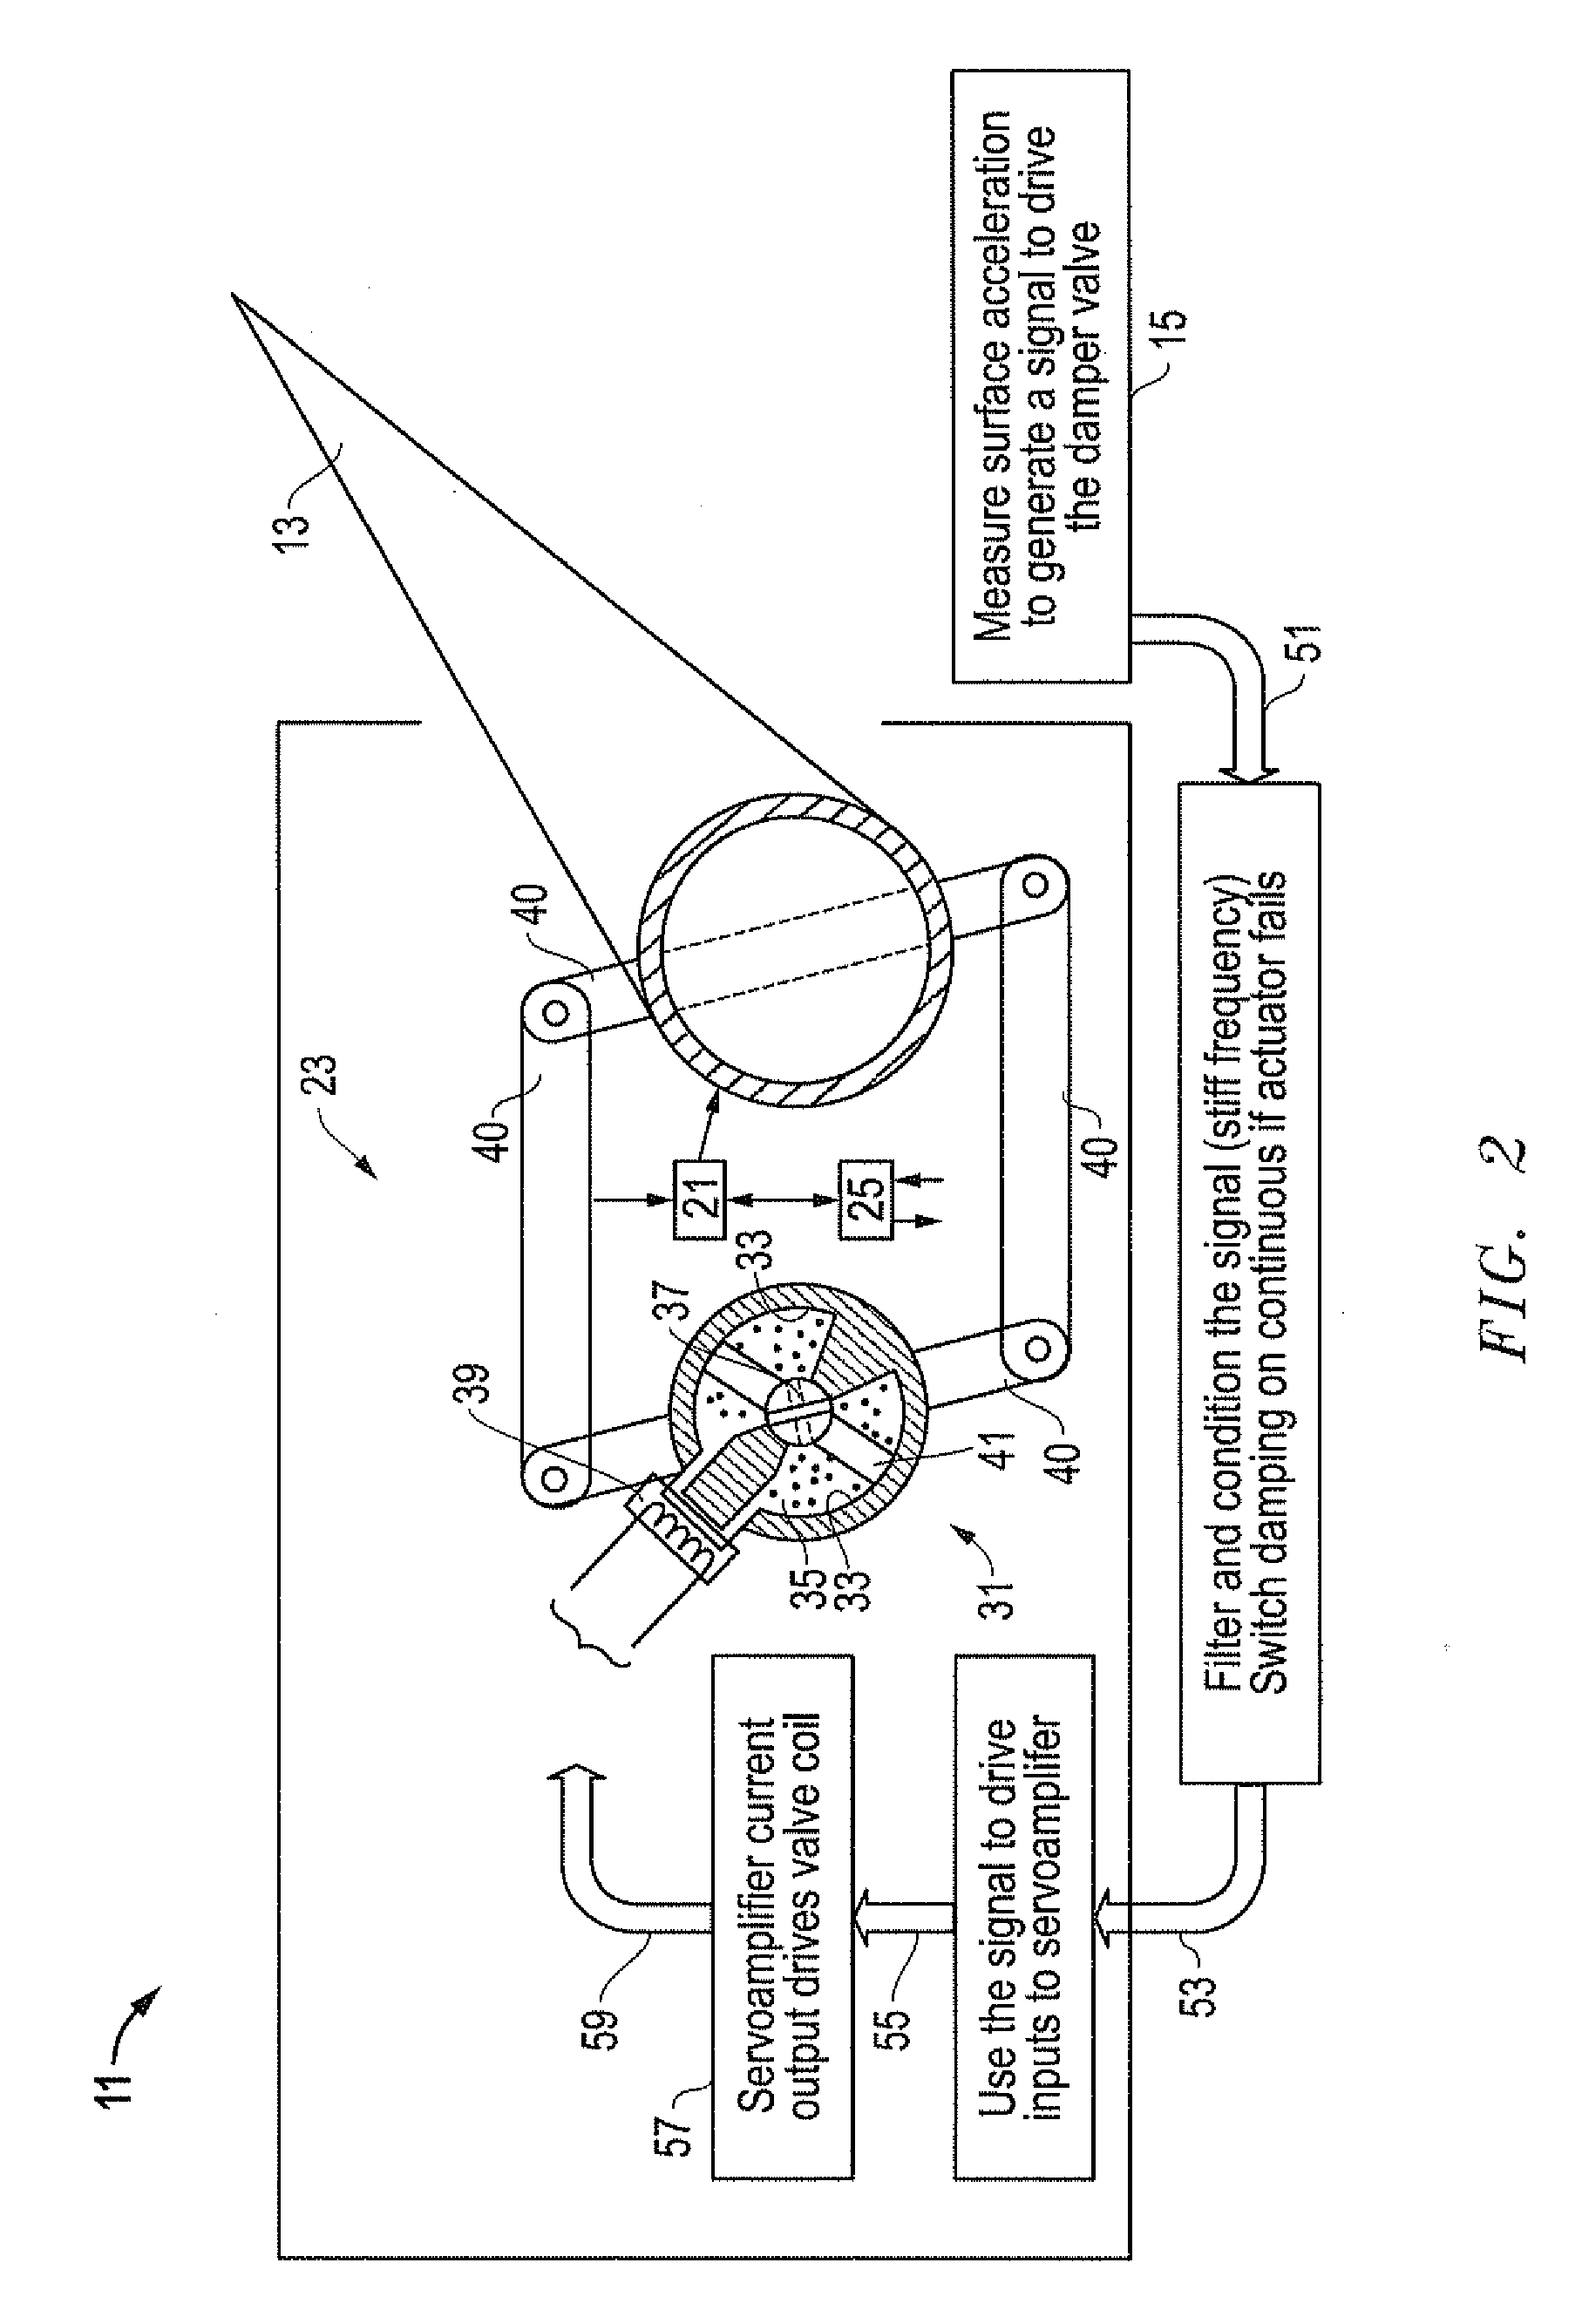 System, method and apparatus for control surface with dynamic compensation